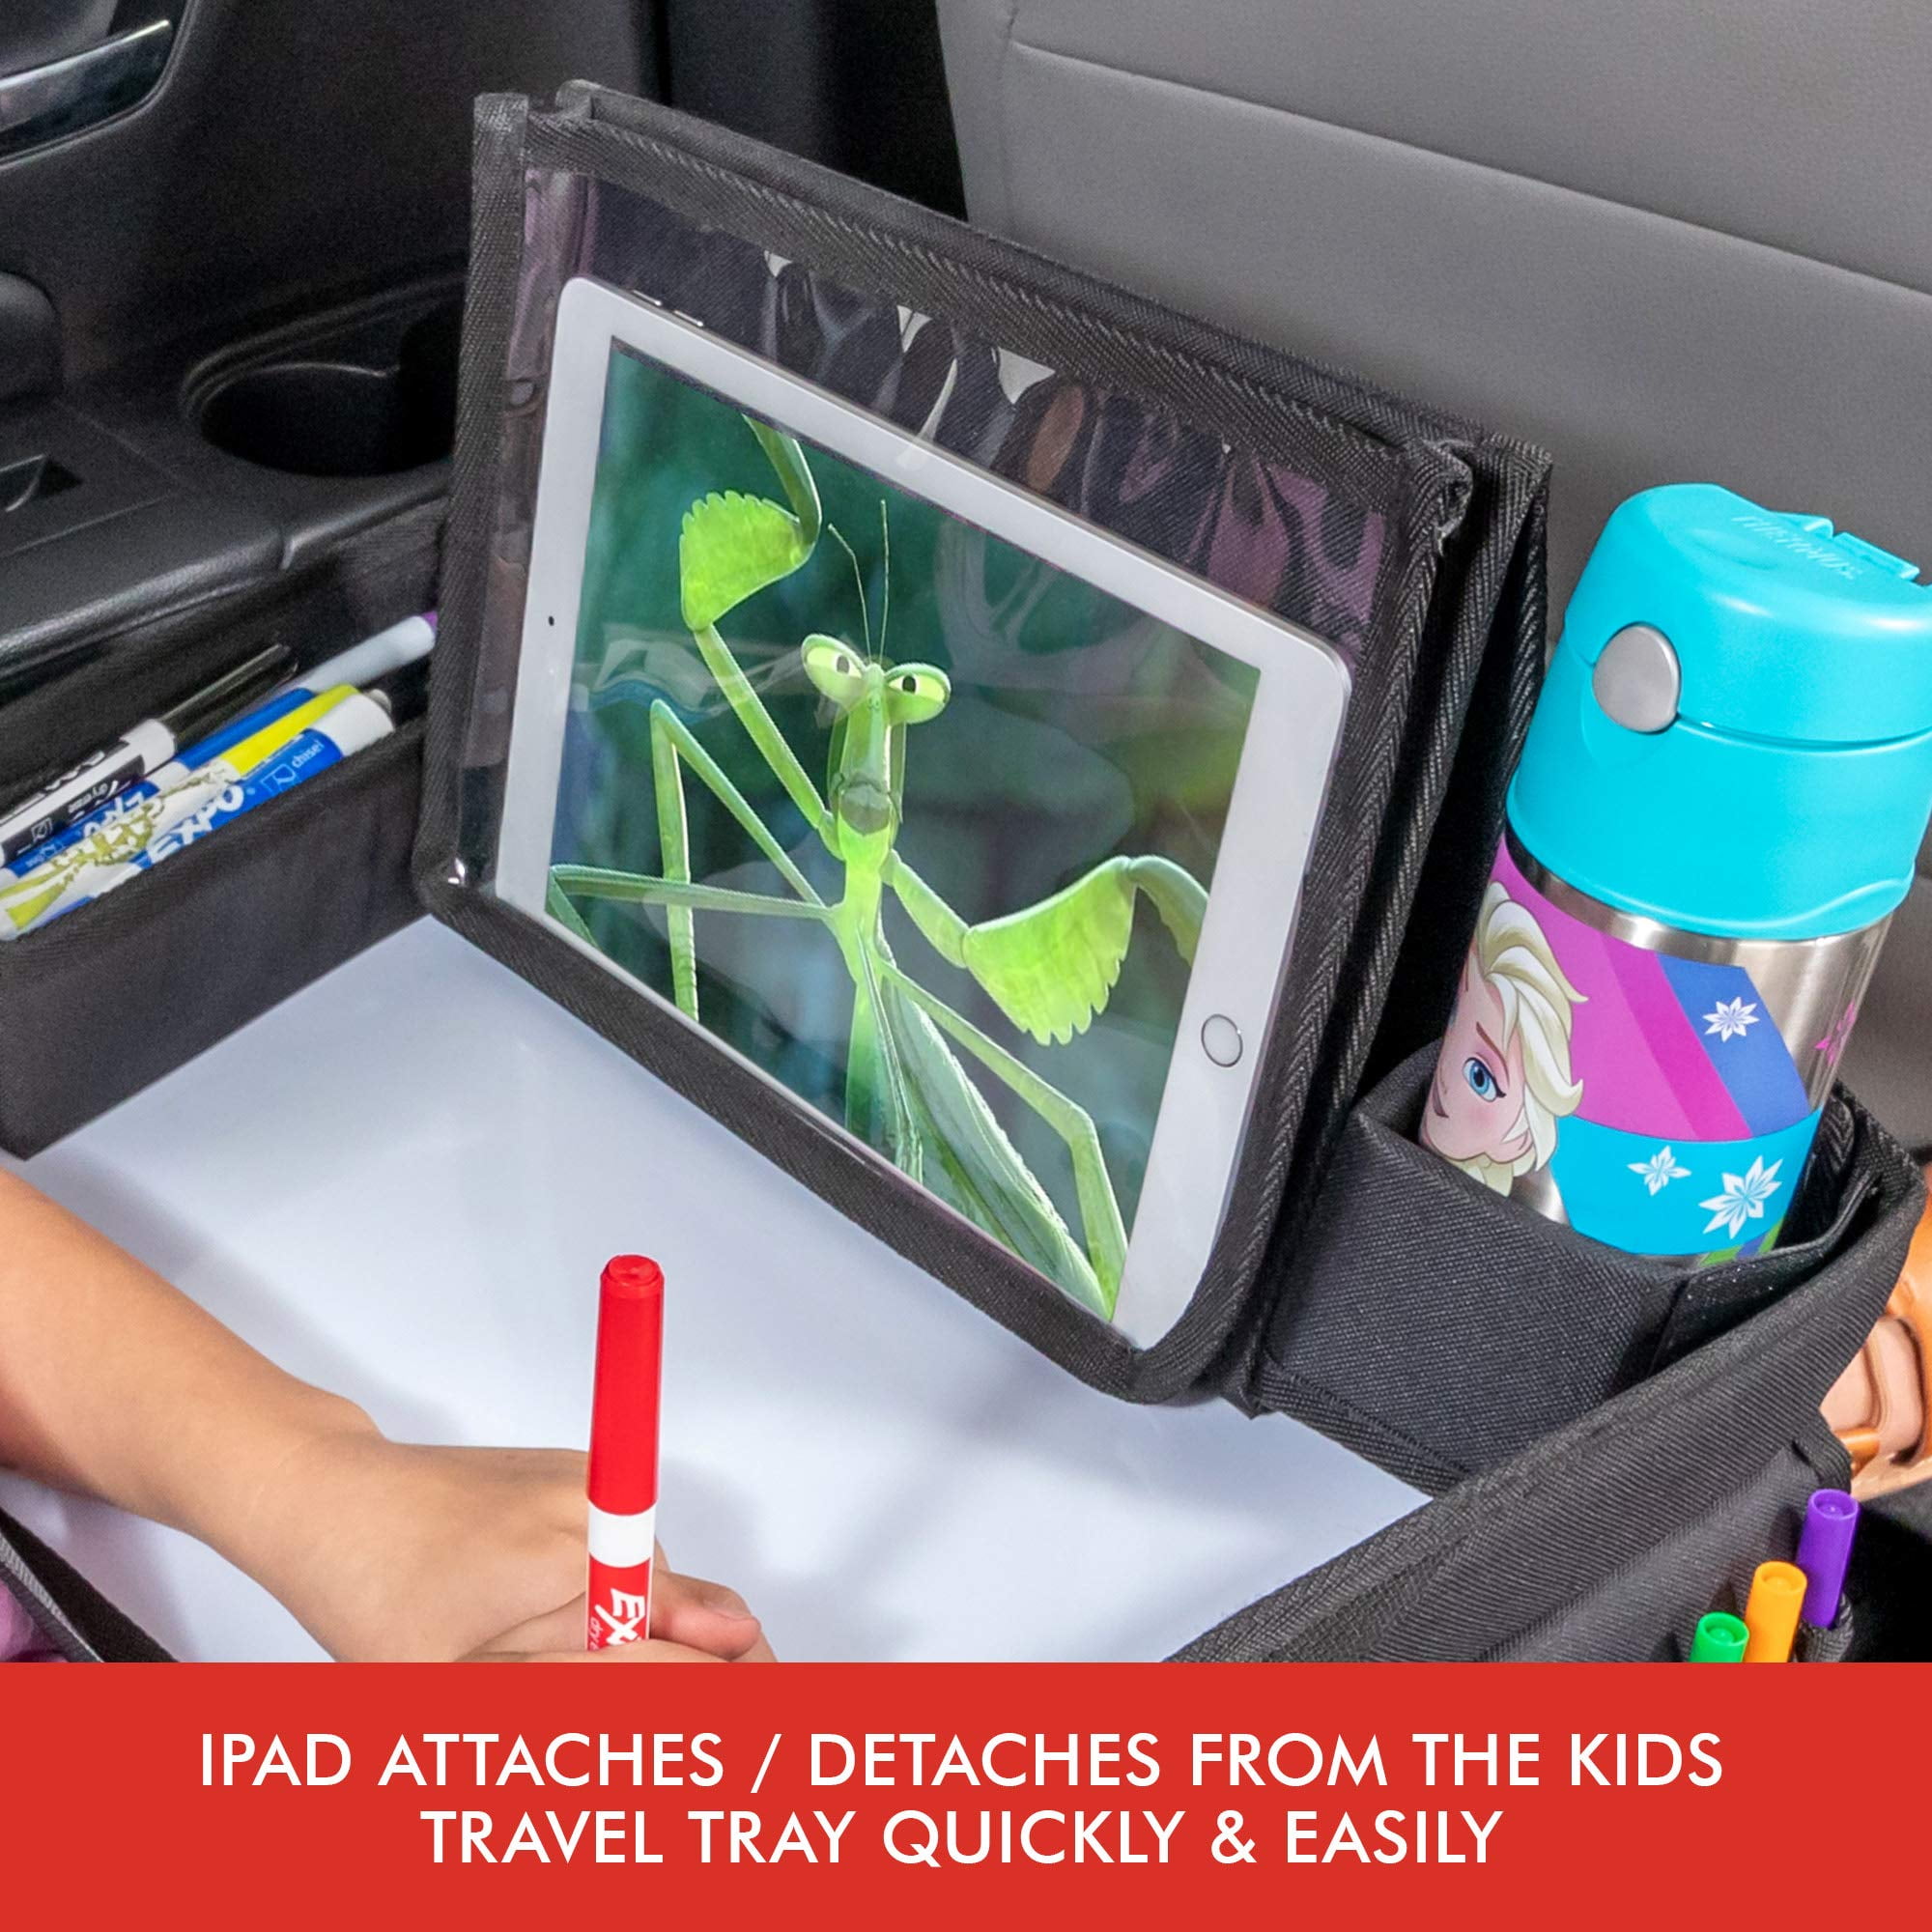 No-Drop Tablet iPad Holder Stand & Art Supplies Storage Pockets 1 Unit, Gray+Red Inspire Active Toddlers & Big Kids for Years w/Dry Erase Board & Eating Snack Tray Kids Car Seat Travel Tray 